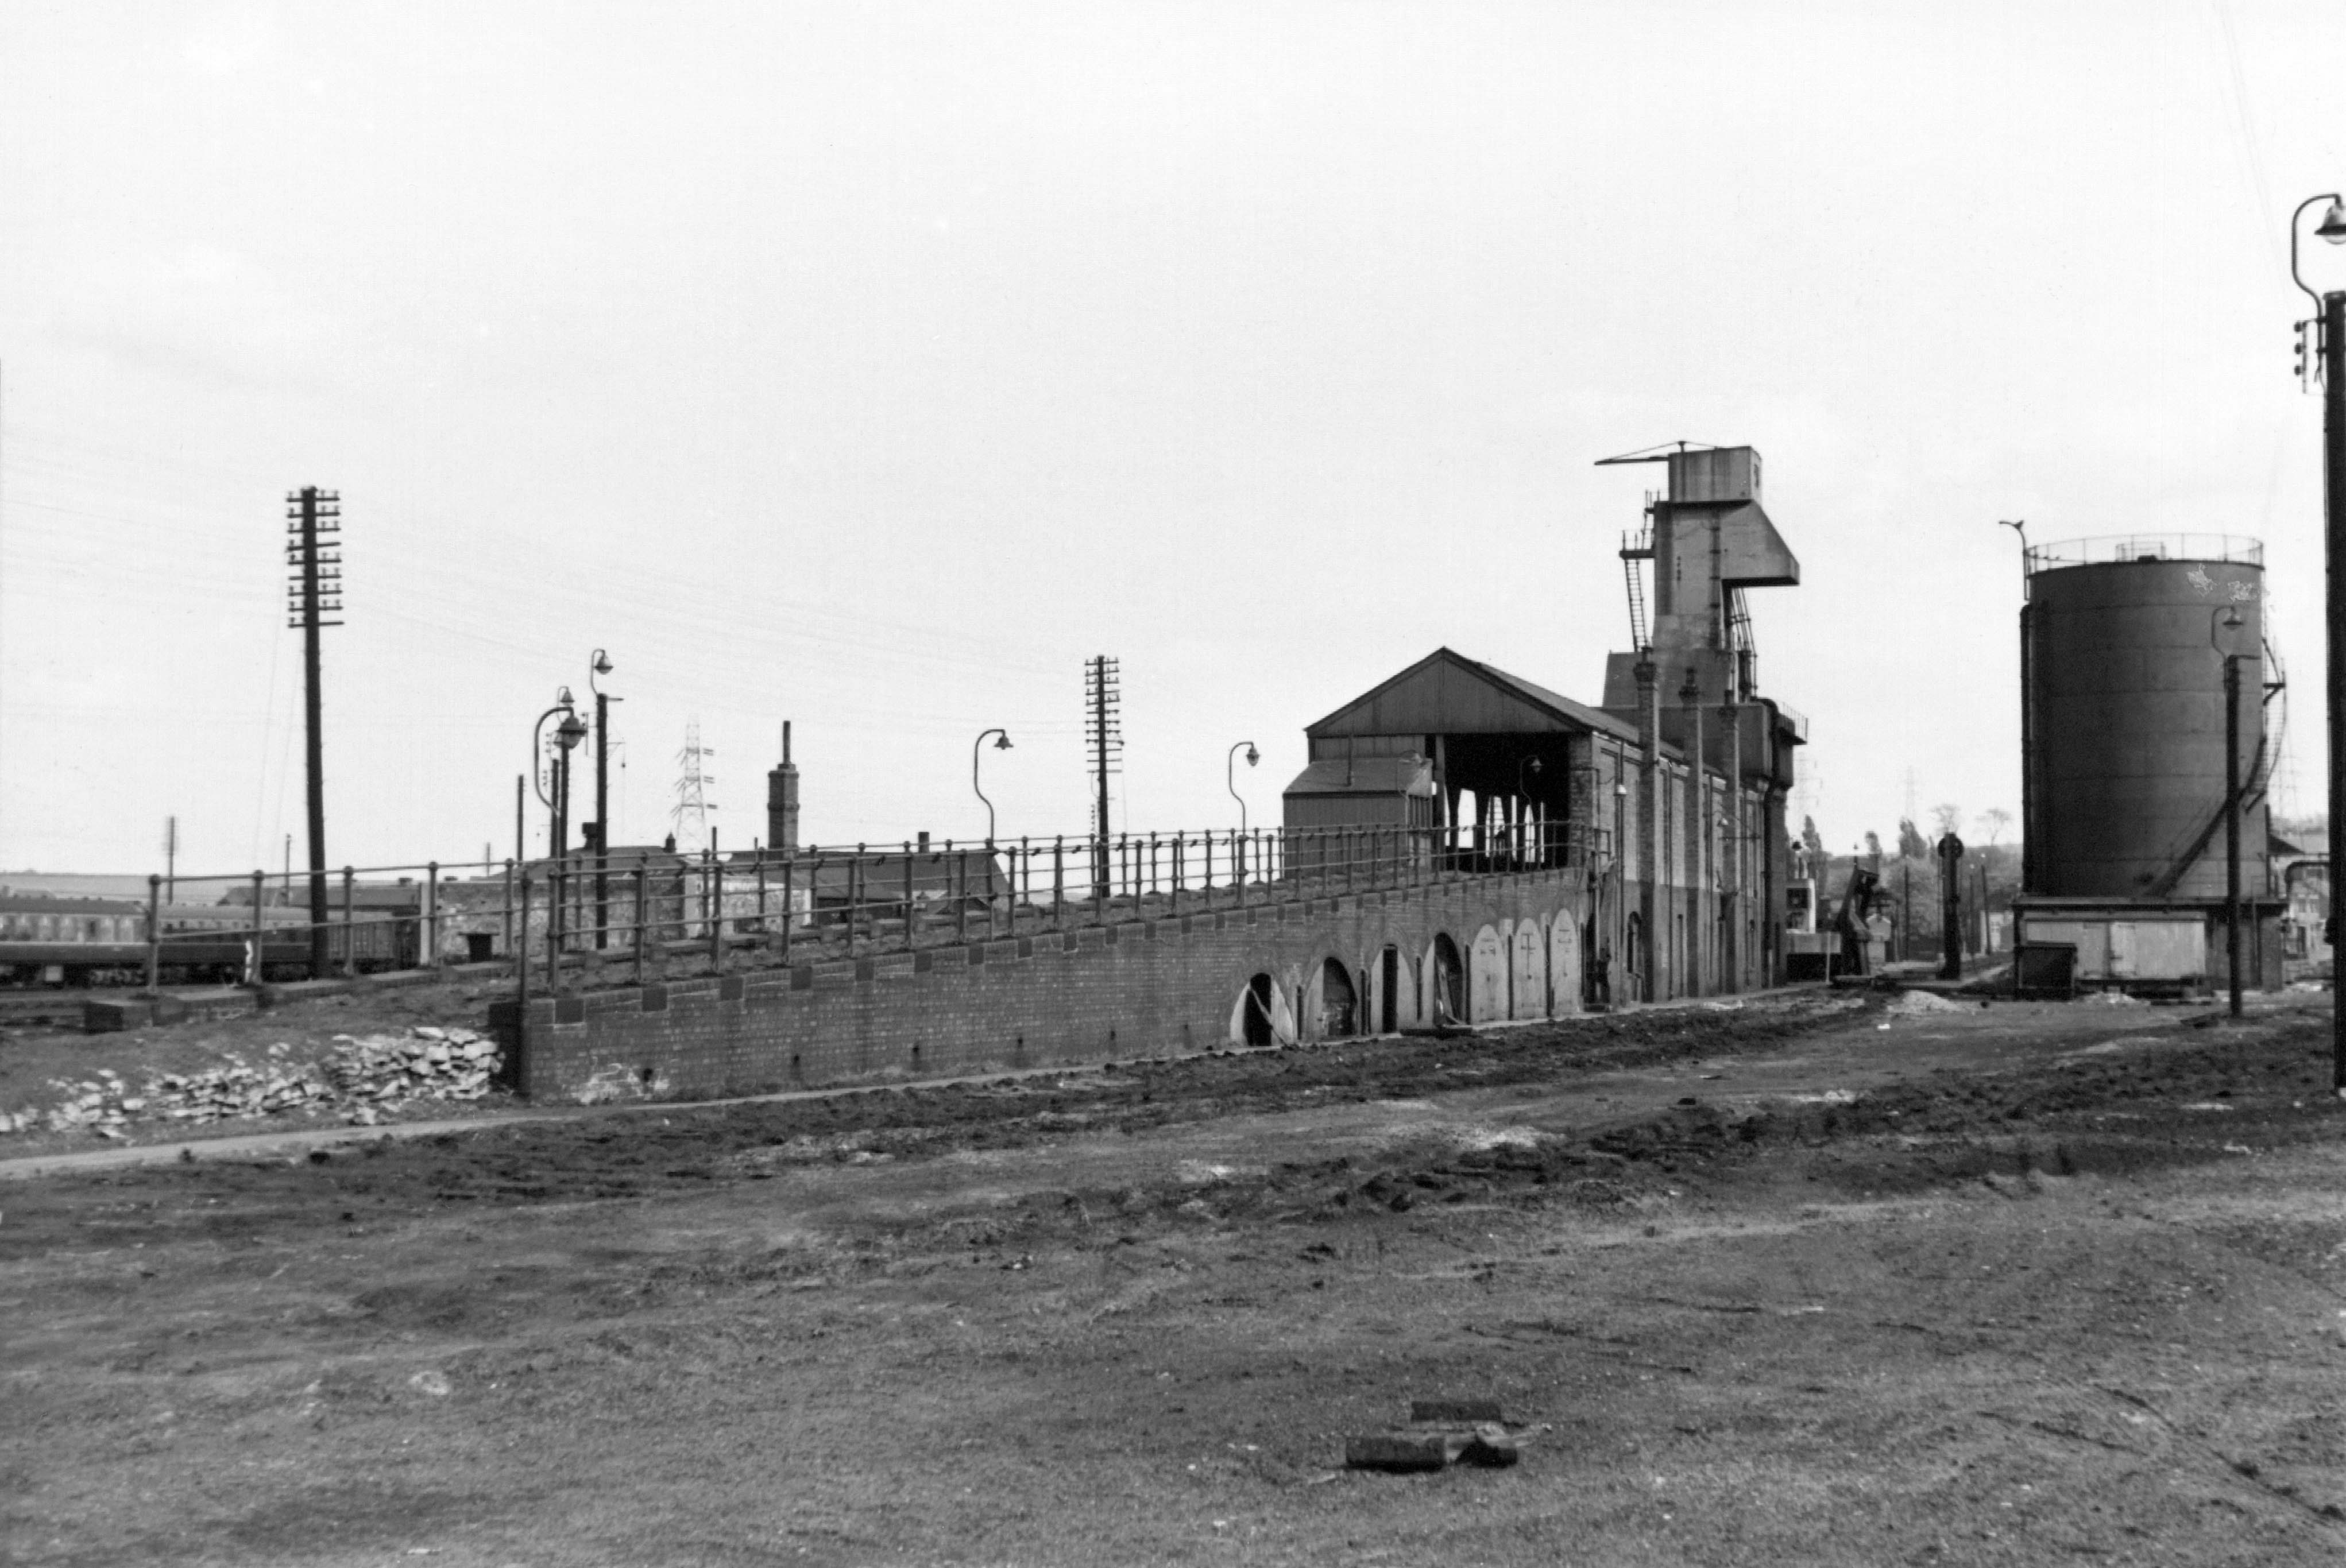 The coal stage at Grantham Loco from the north west, showing how the ramp and the stage itself were built like a viaduct, supported on brick arches which were used as messrooms and stores. This photograph was taken in 1964 after the tracks had been lifted but before demolition commenced. Photograph lent by Ken Willetts.